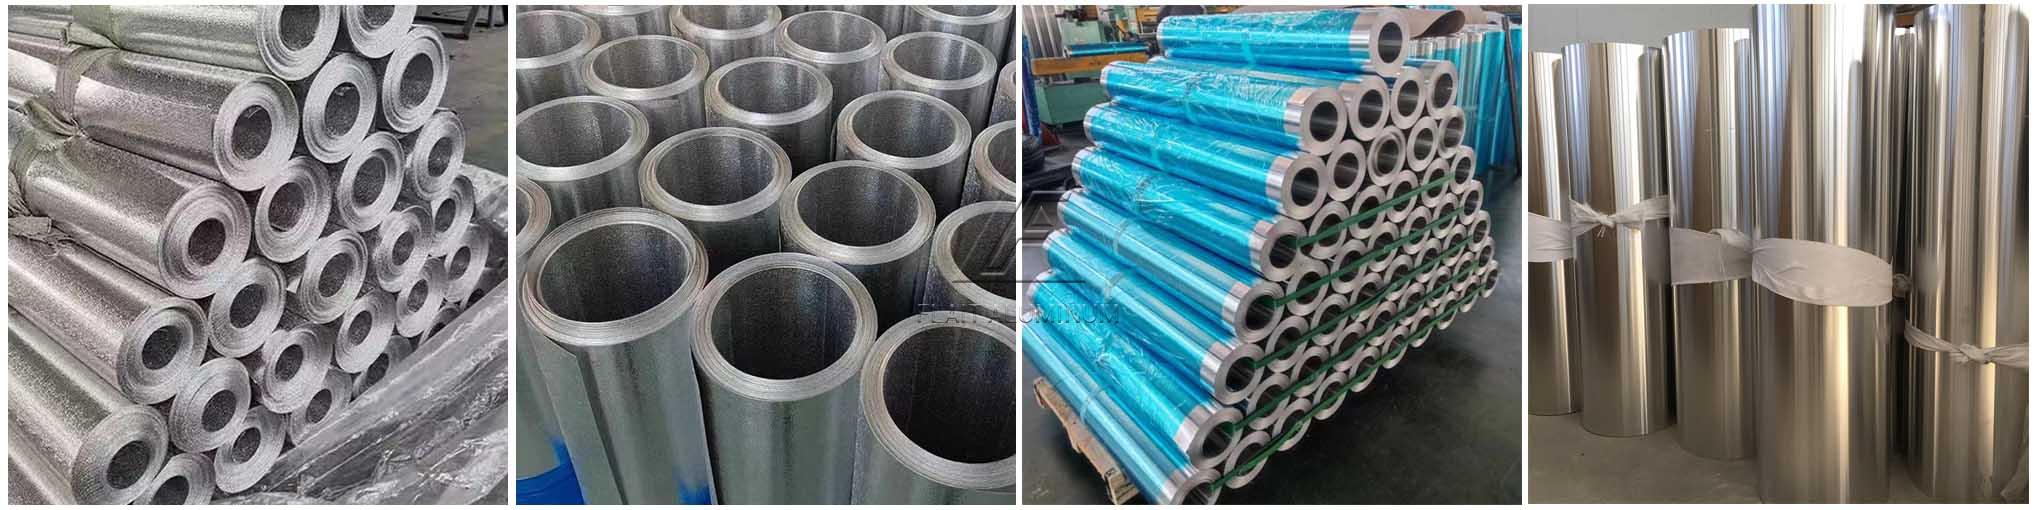 3003 H14 Pipe jacketing insulation aluminum coil roll